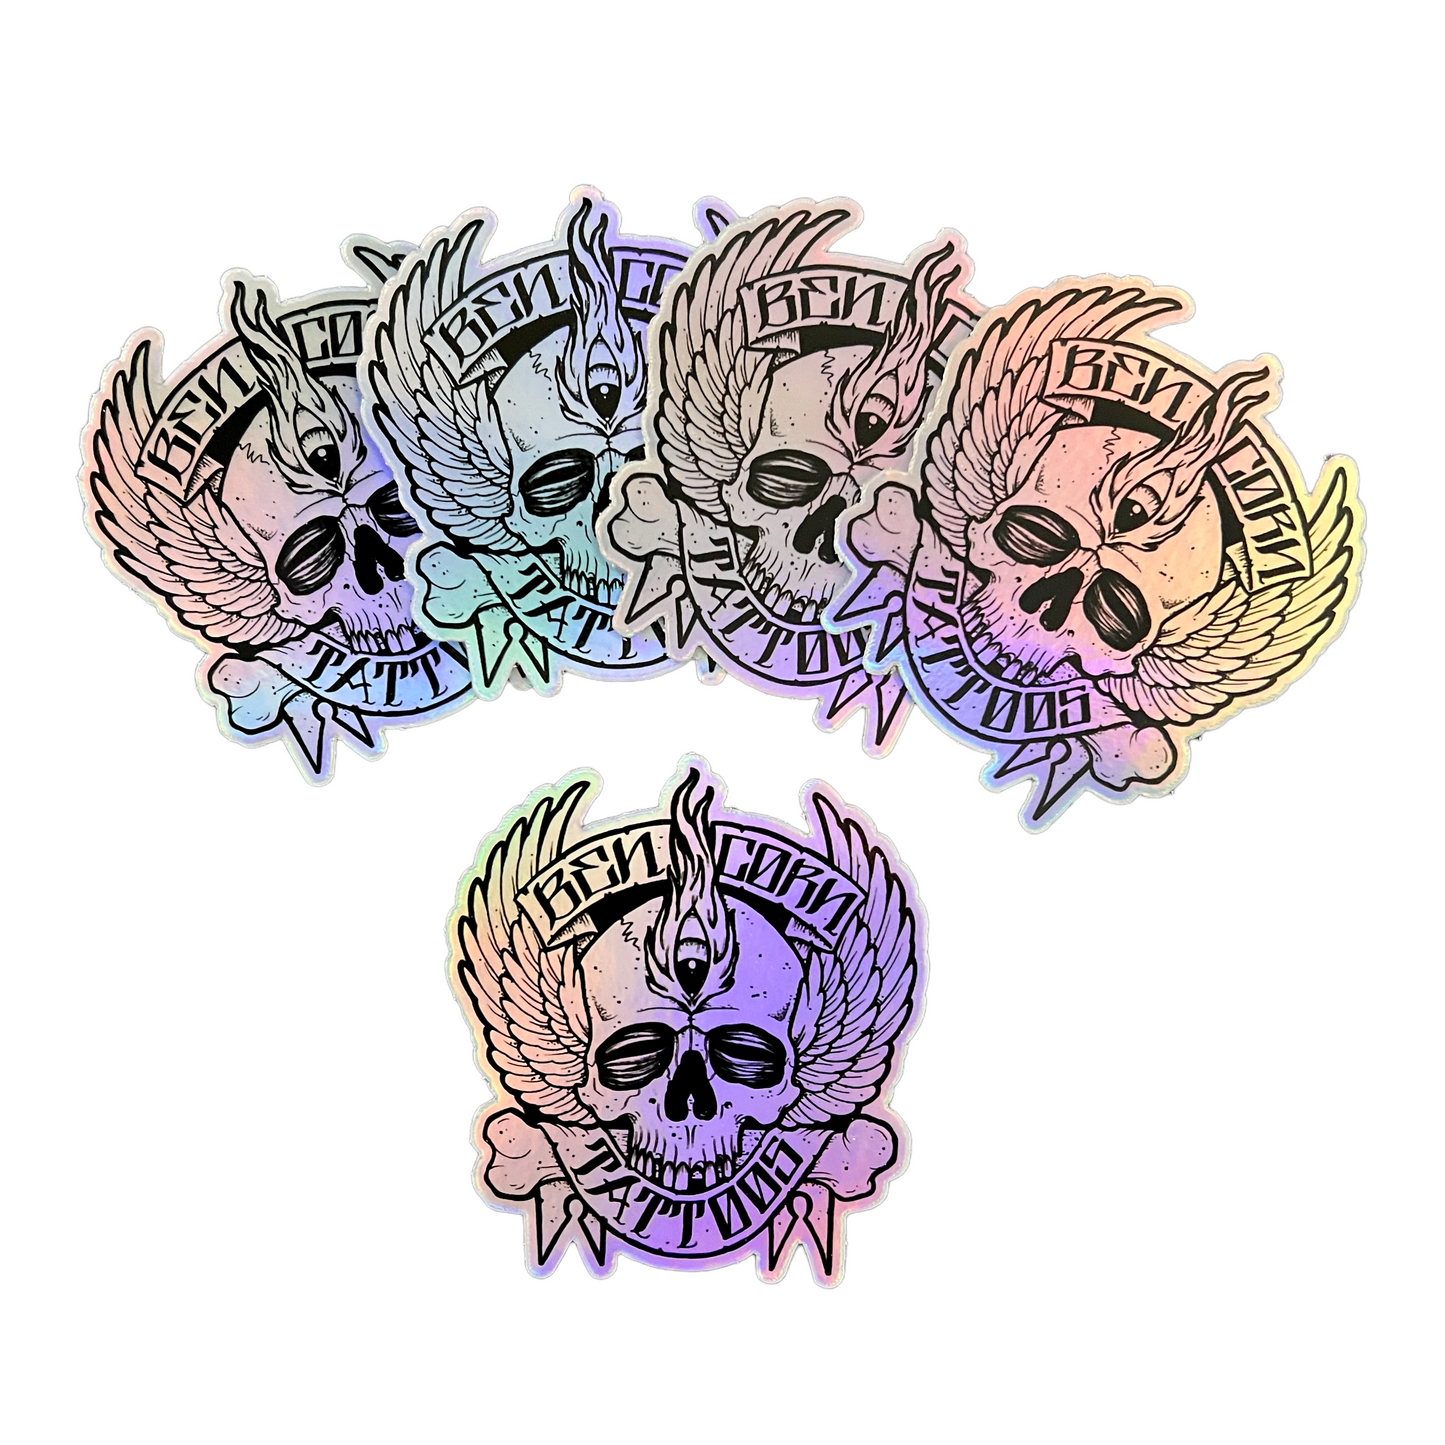 Holographic Ben Corn tattoos stickers